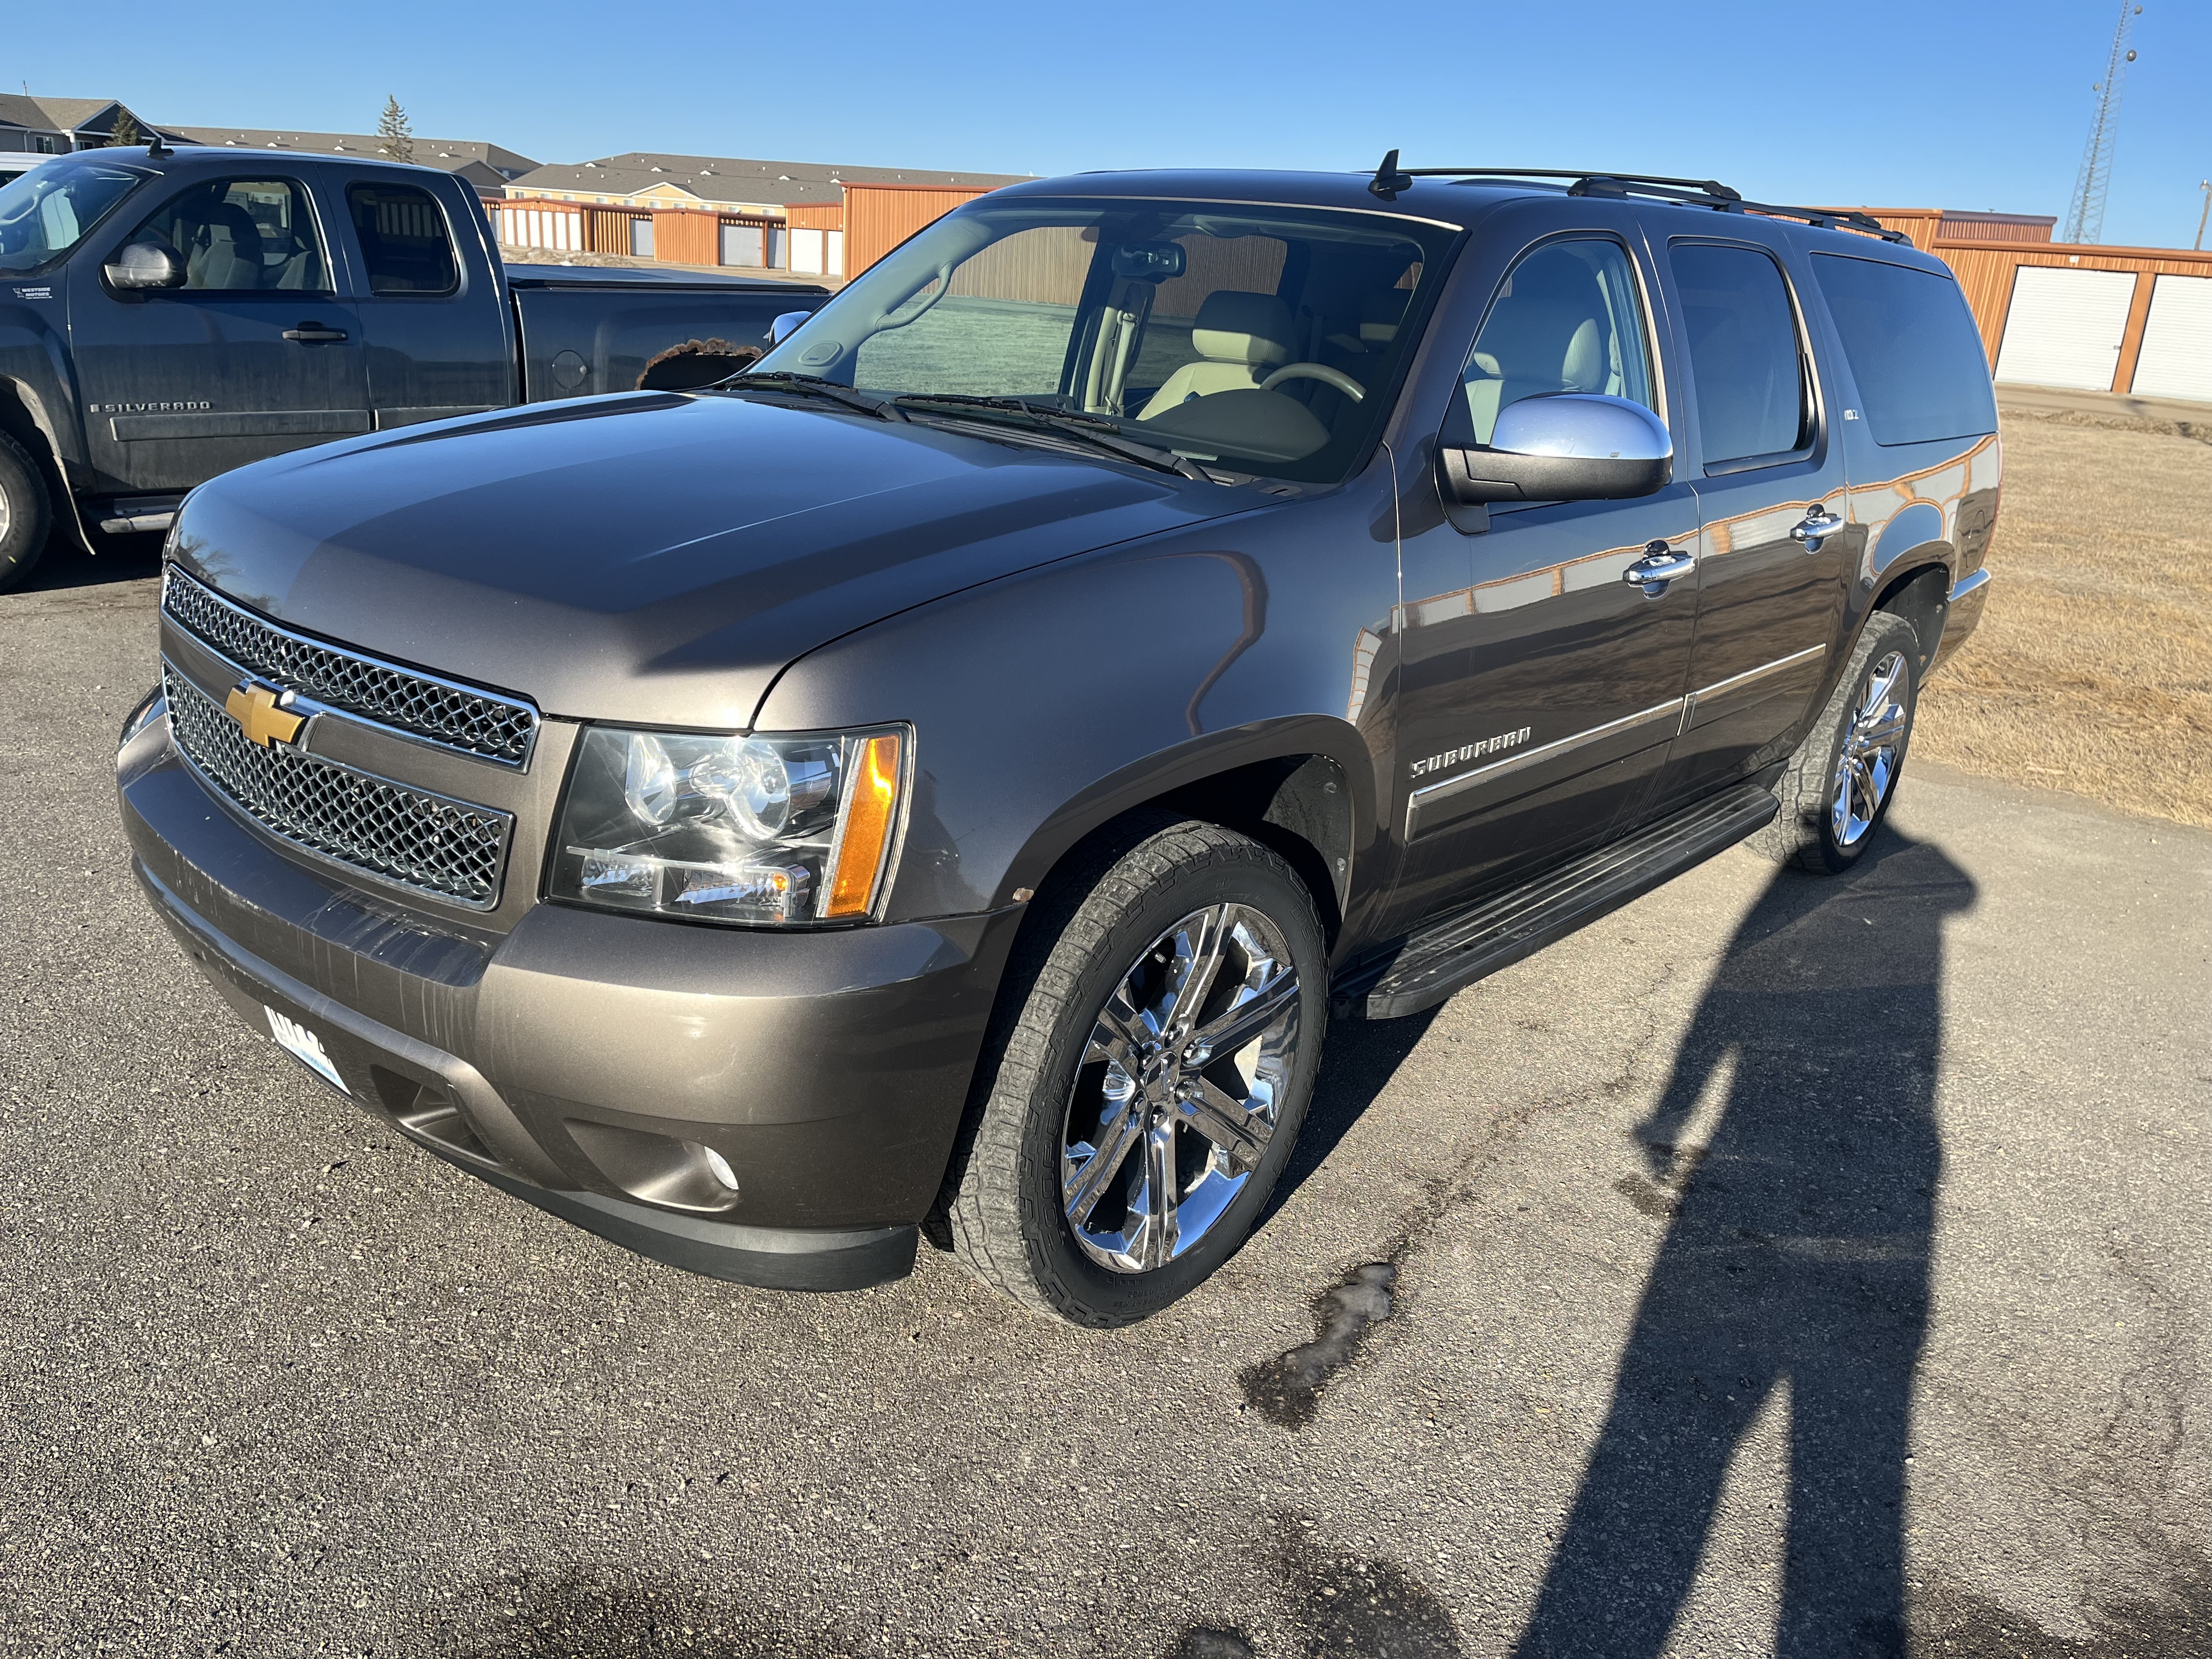 Used 2012 Chevrolet Suburban LTZ with VIN 1GNSKKE73CR216047 for sale in Thief River Falls, Minnesota